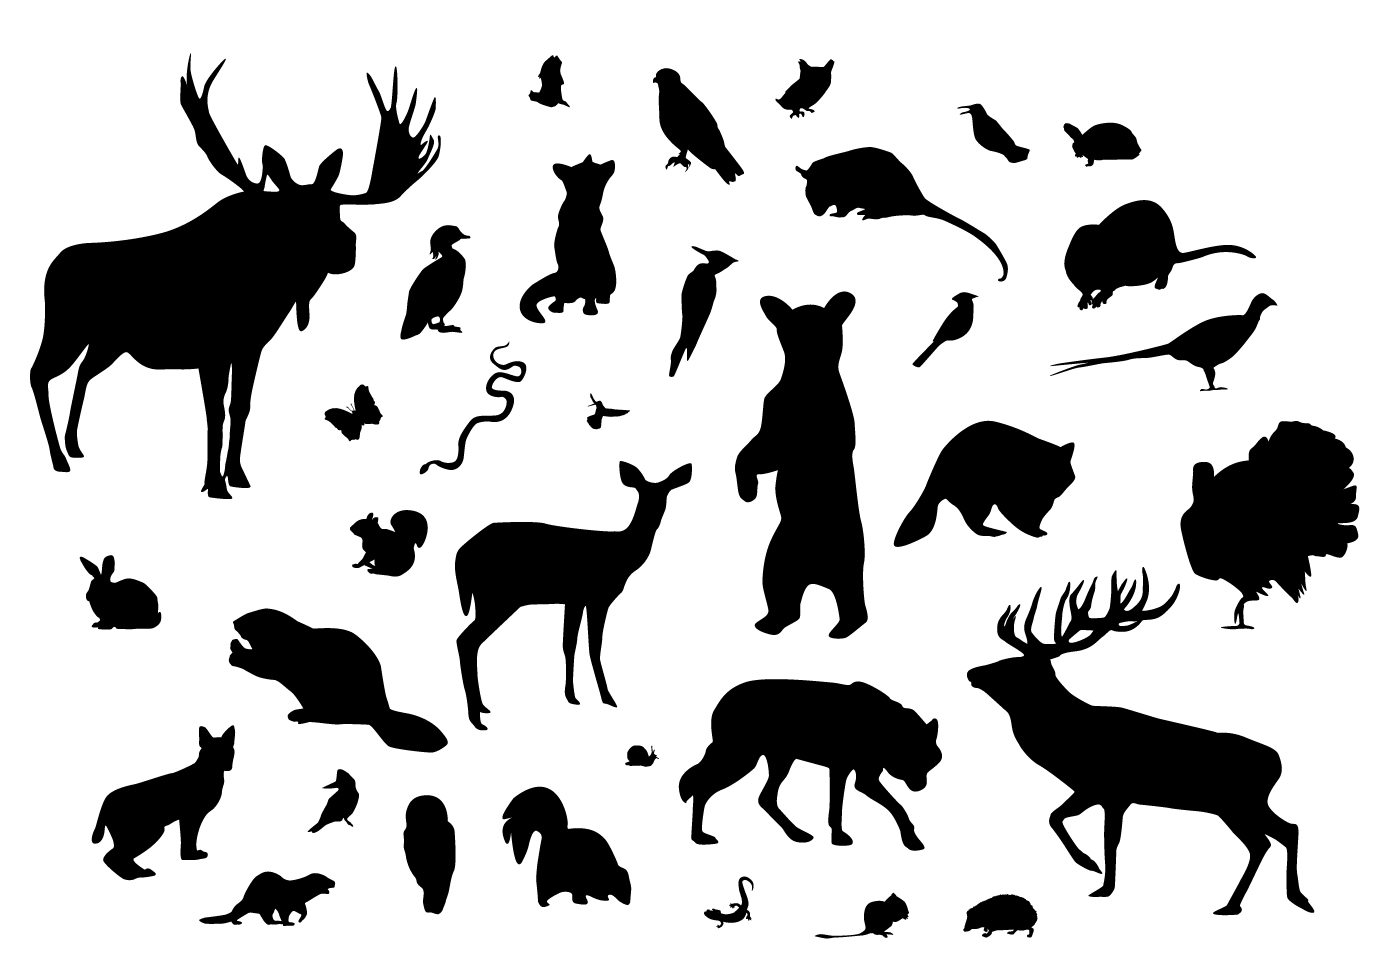 Download Forest Animal Silhouettes 93534 - Download Free Vectors, Clipart Graphics & Vector Art